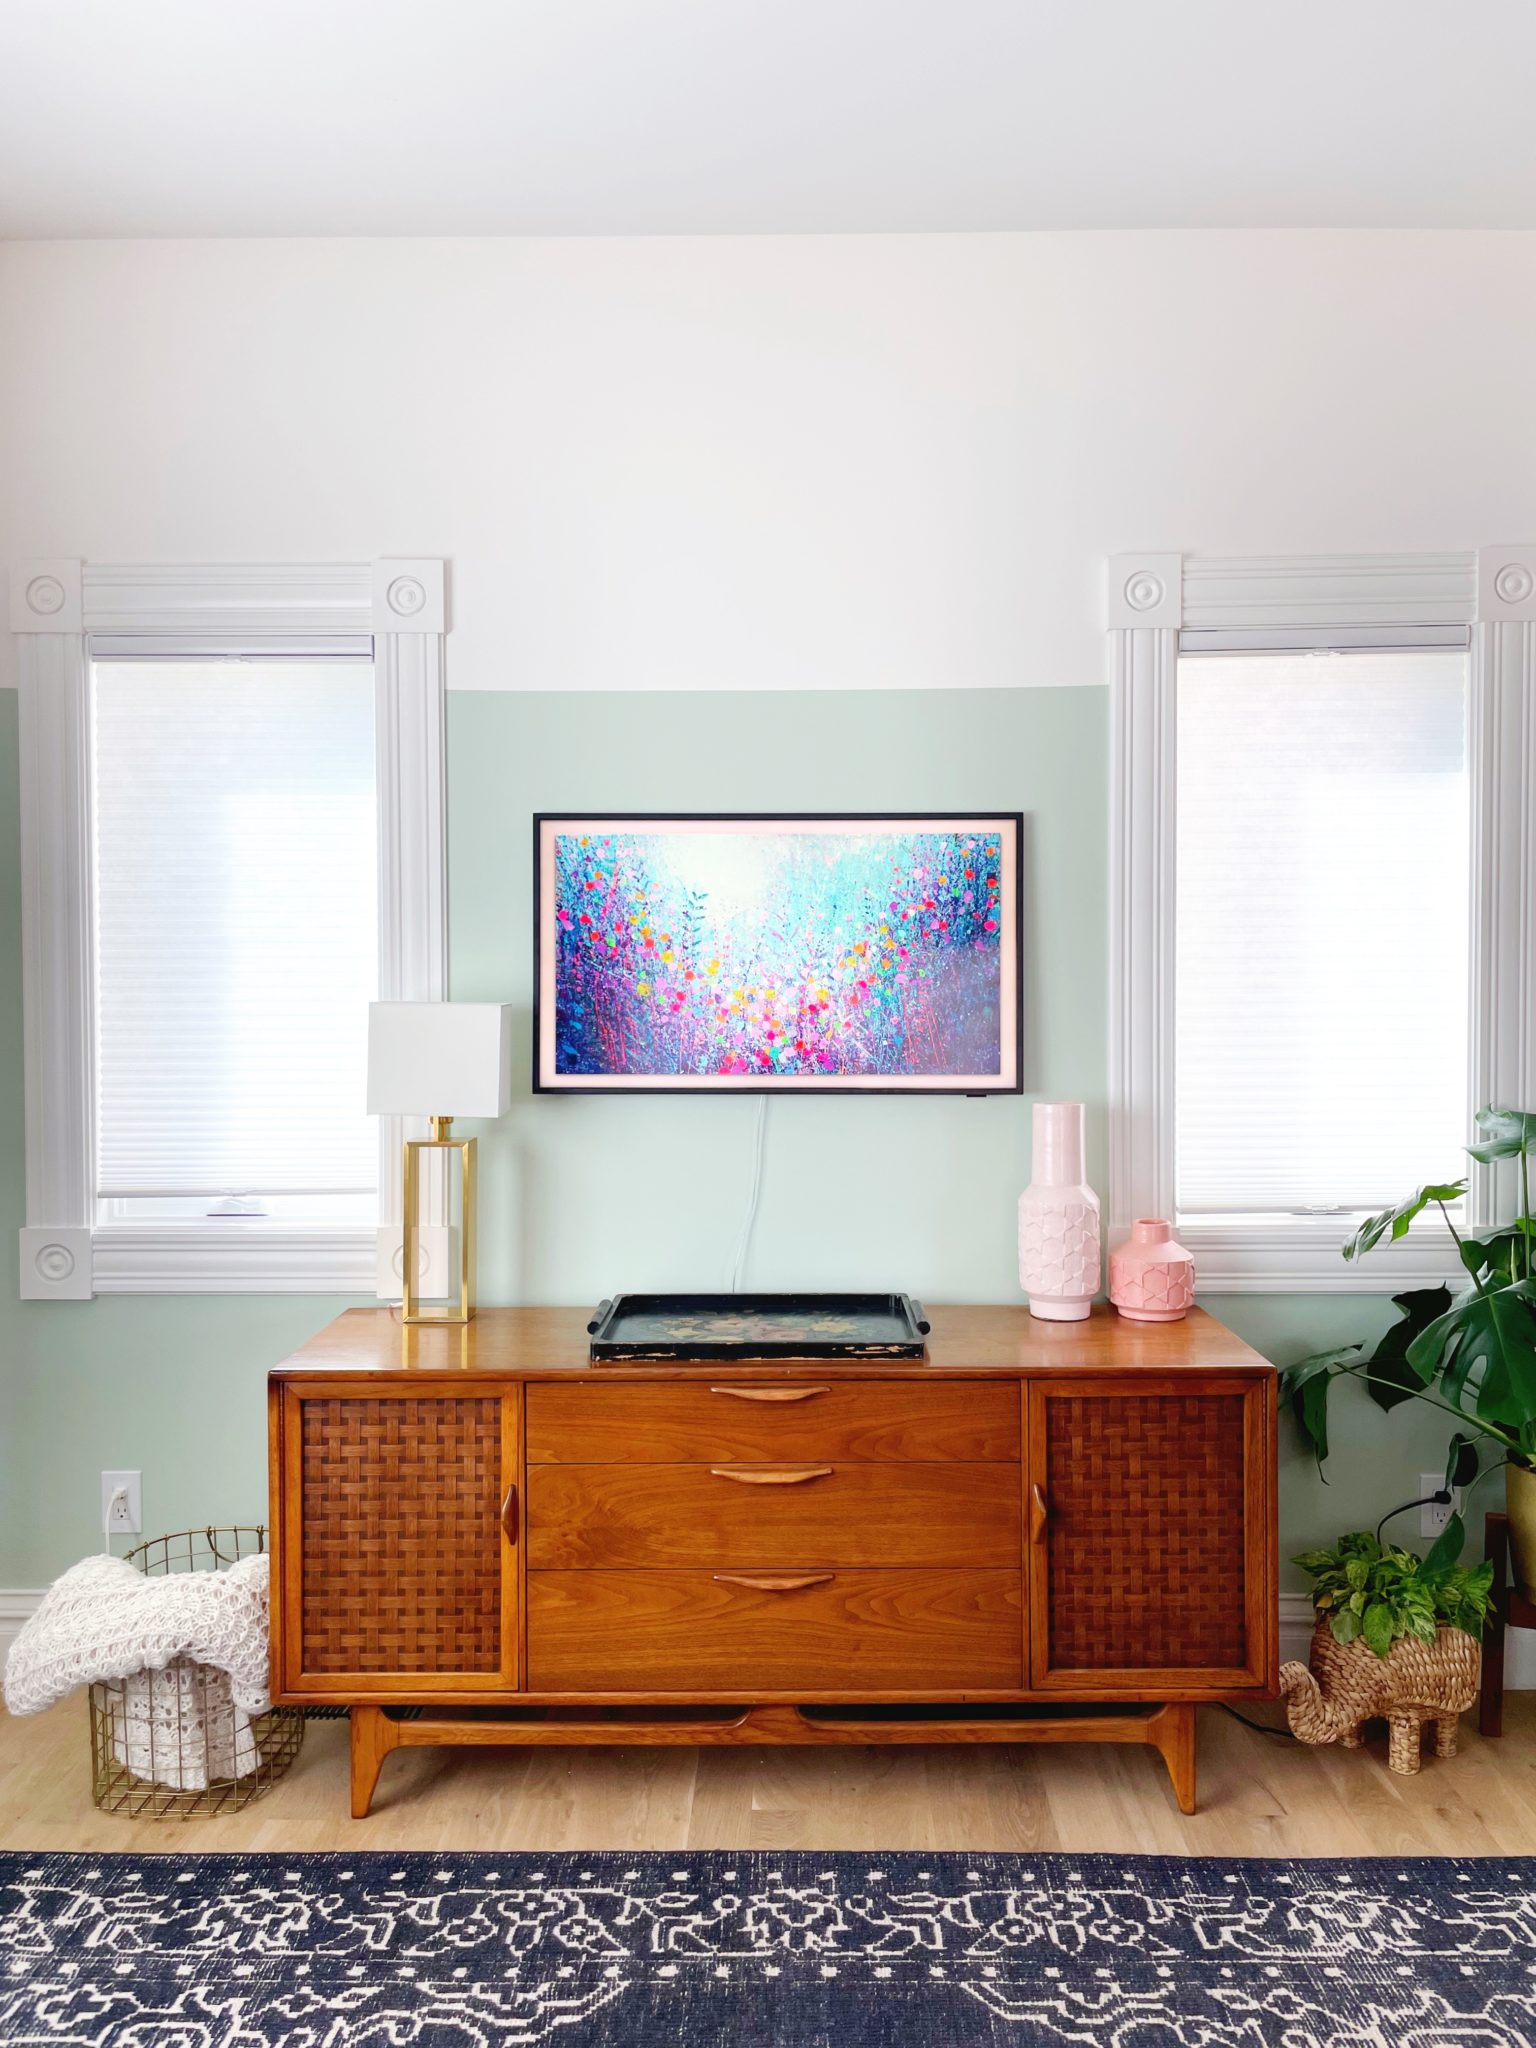 A TV on a wall with a sideboard and plants and decorative objects.